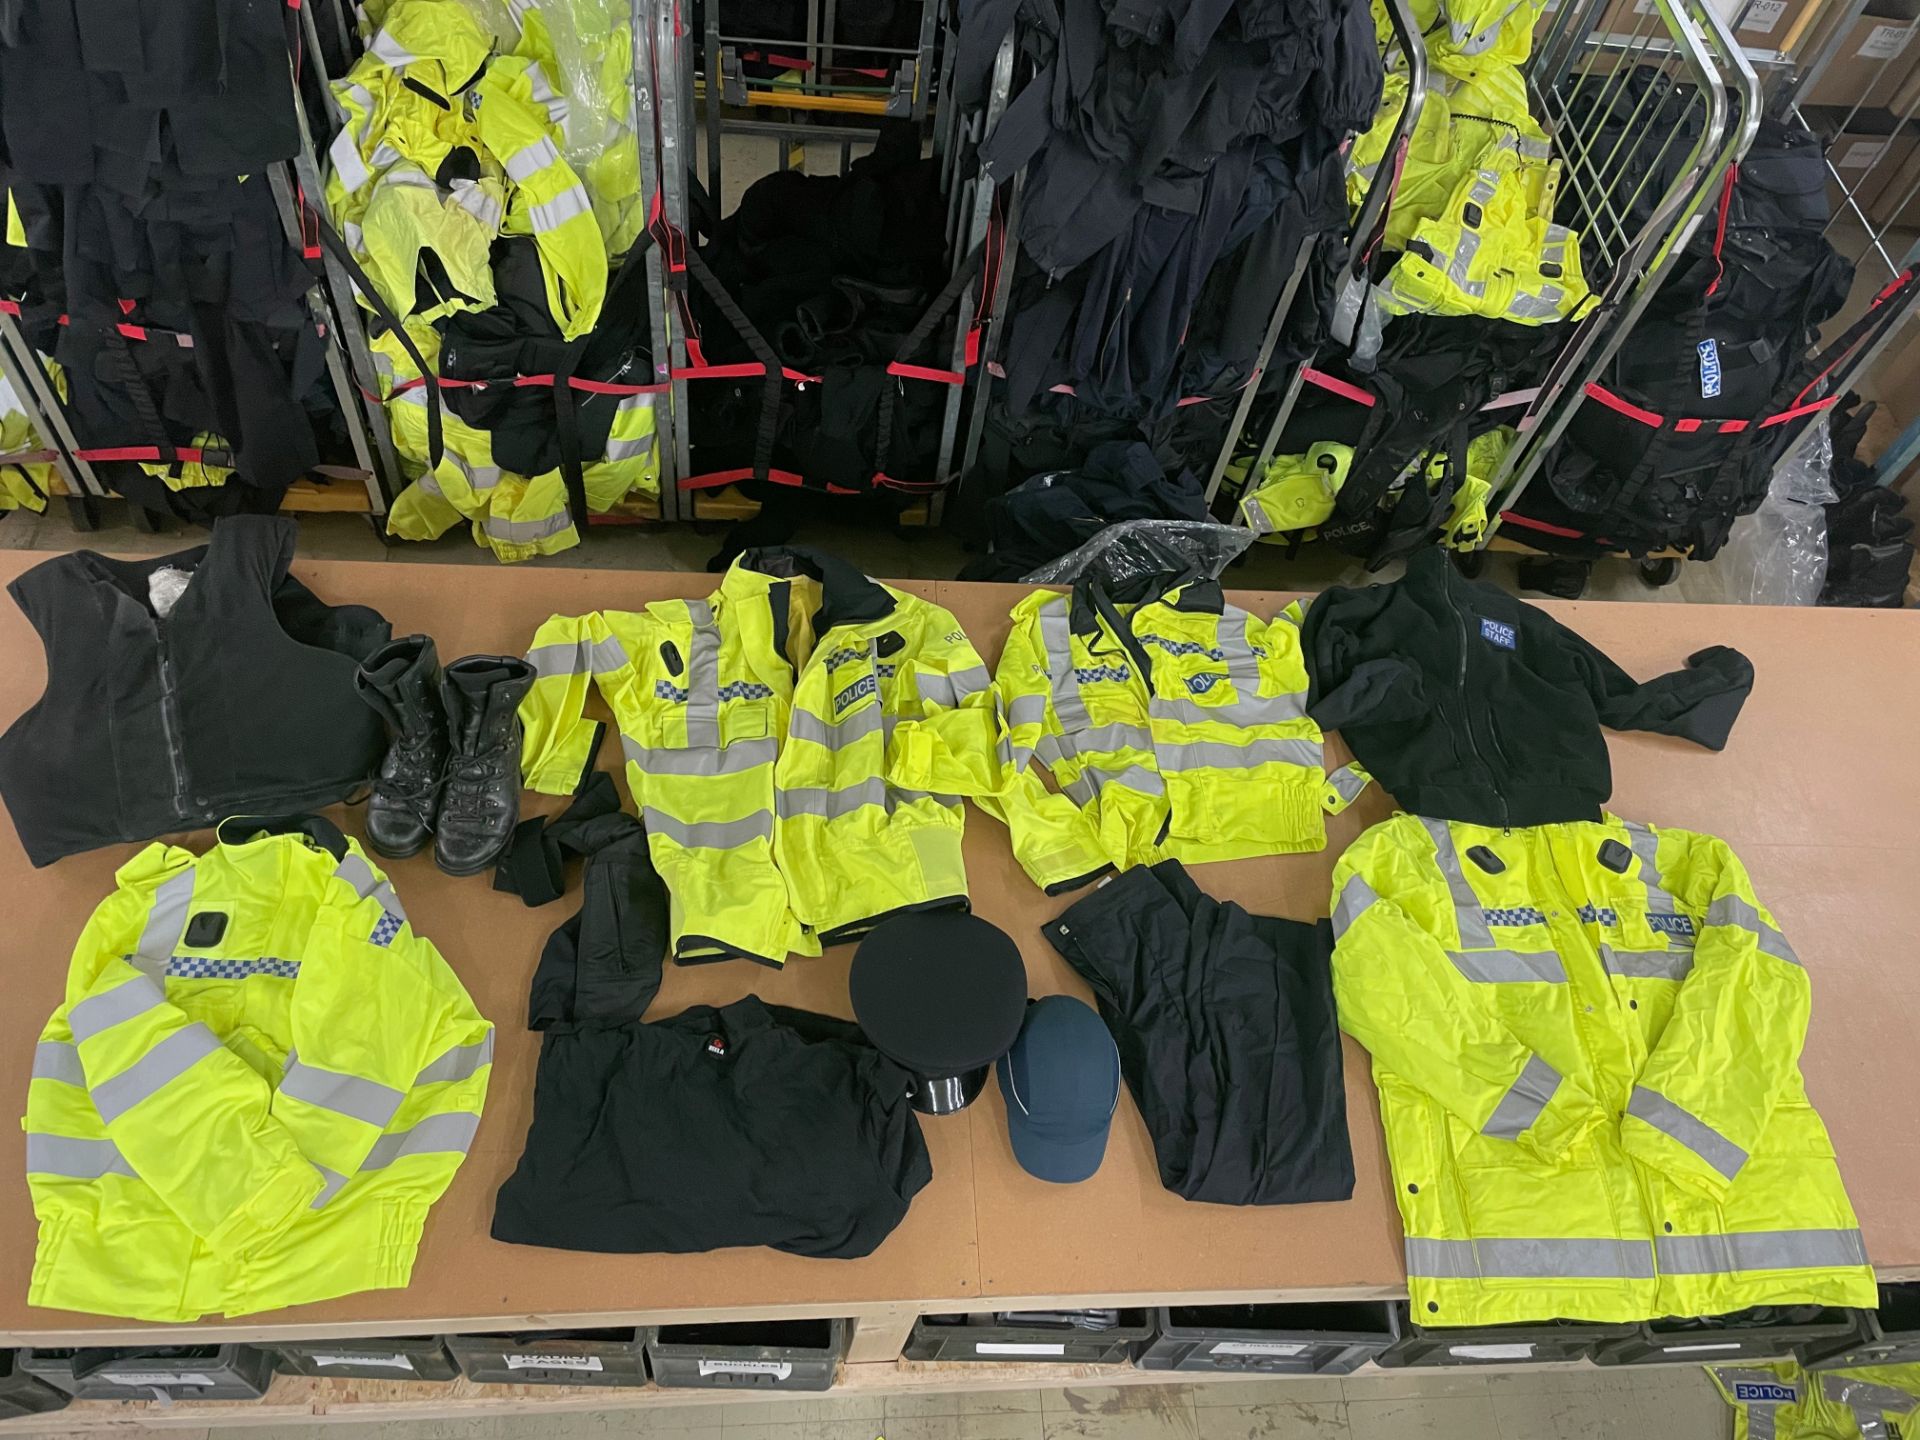 20 X BAGS EX POLICE CLOTHING & ACCESSORIES - RRP £5500.00 - Image 6 of 12